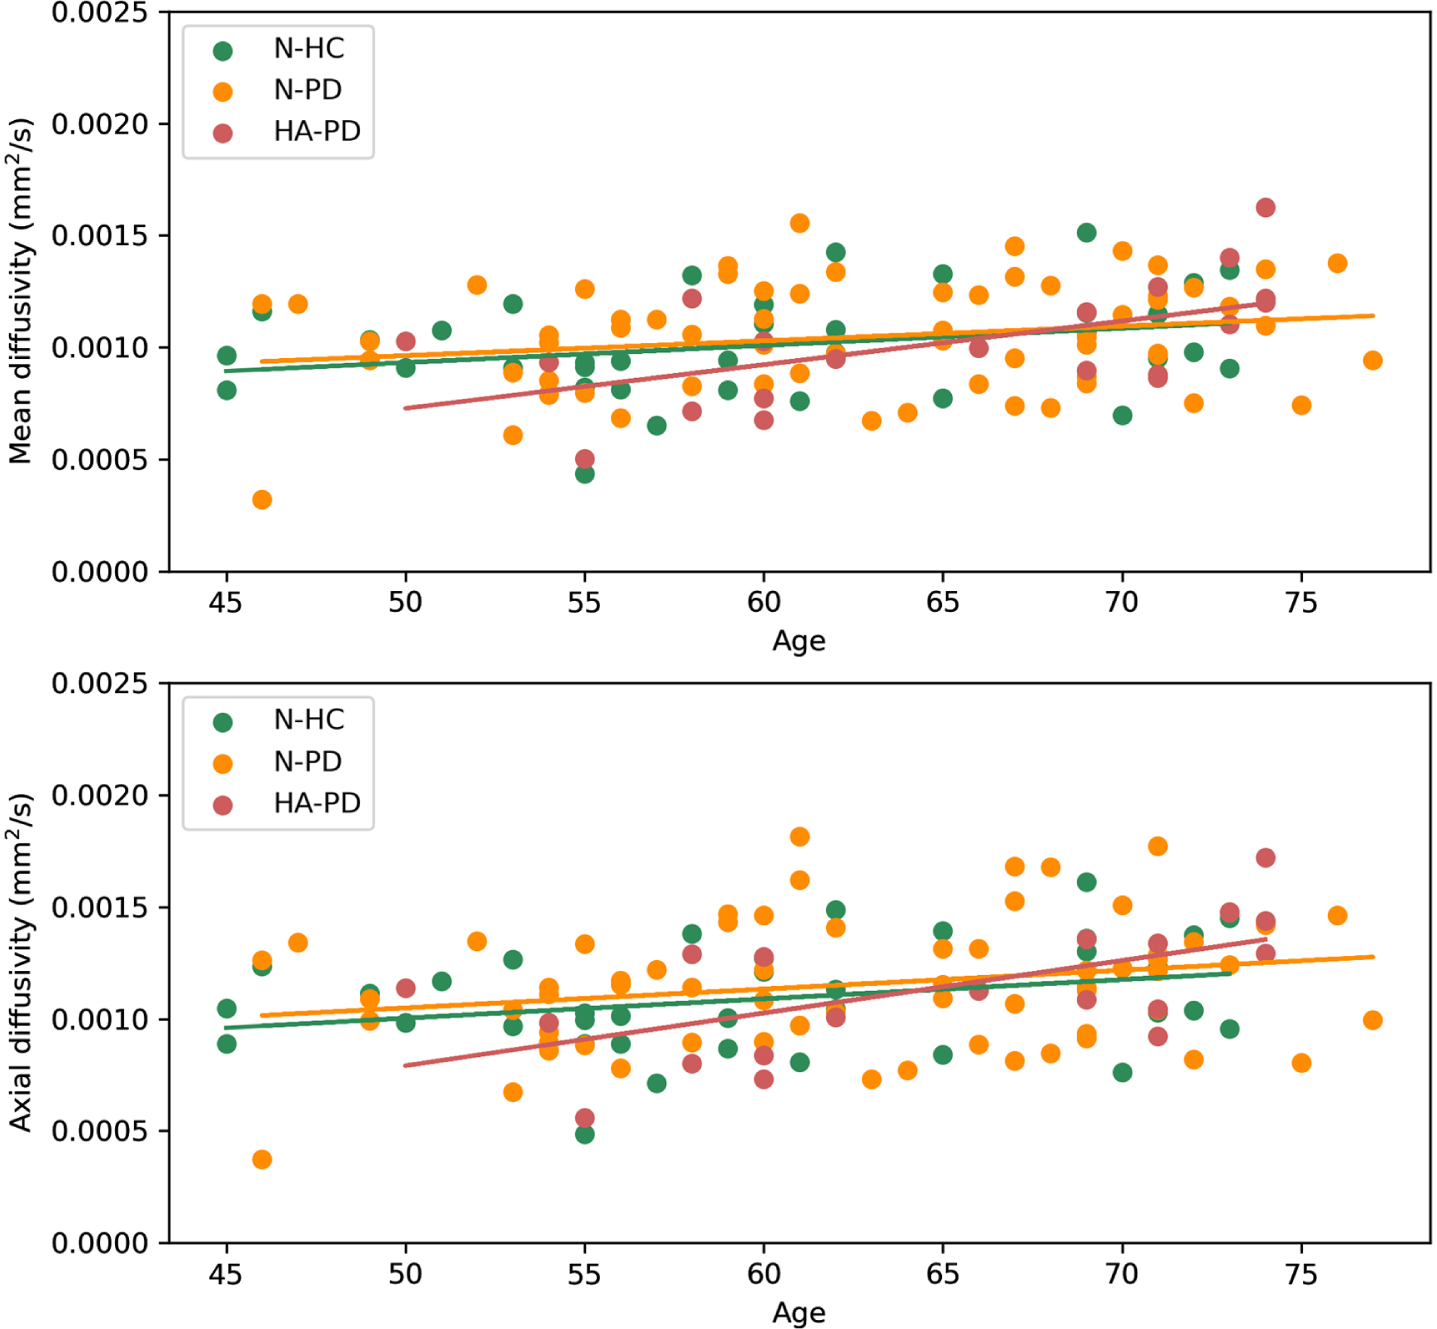 Correlation between mean diffusivity and age per group, and correlation between axial diffusivity and age per group. For the hyposmic/anosmic Parkinson’s disease patients (HA-PD) significant correlations were found between age and mean diffusivity (r = 0.576, p = 0.008) and between age and axial diffusivity (r = 0.667, p = 0.001).